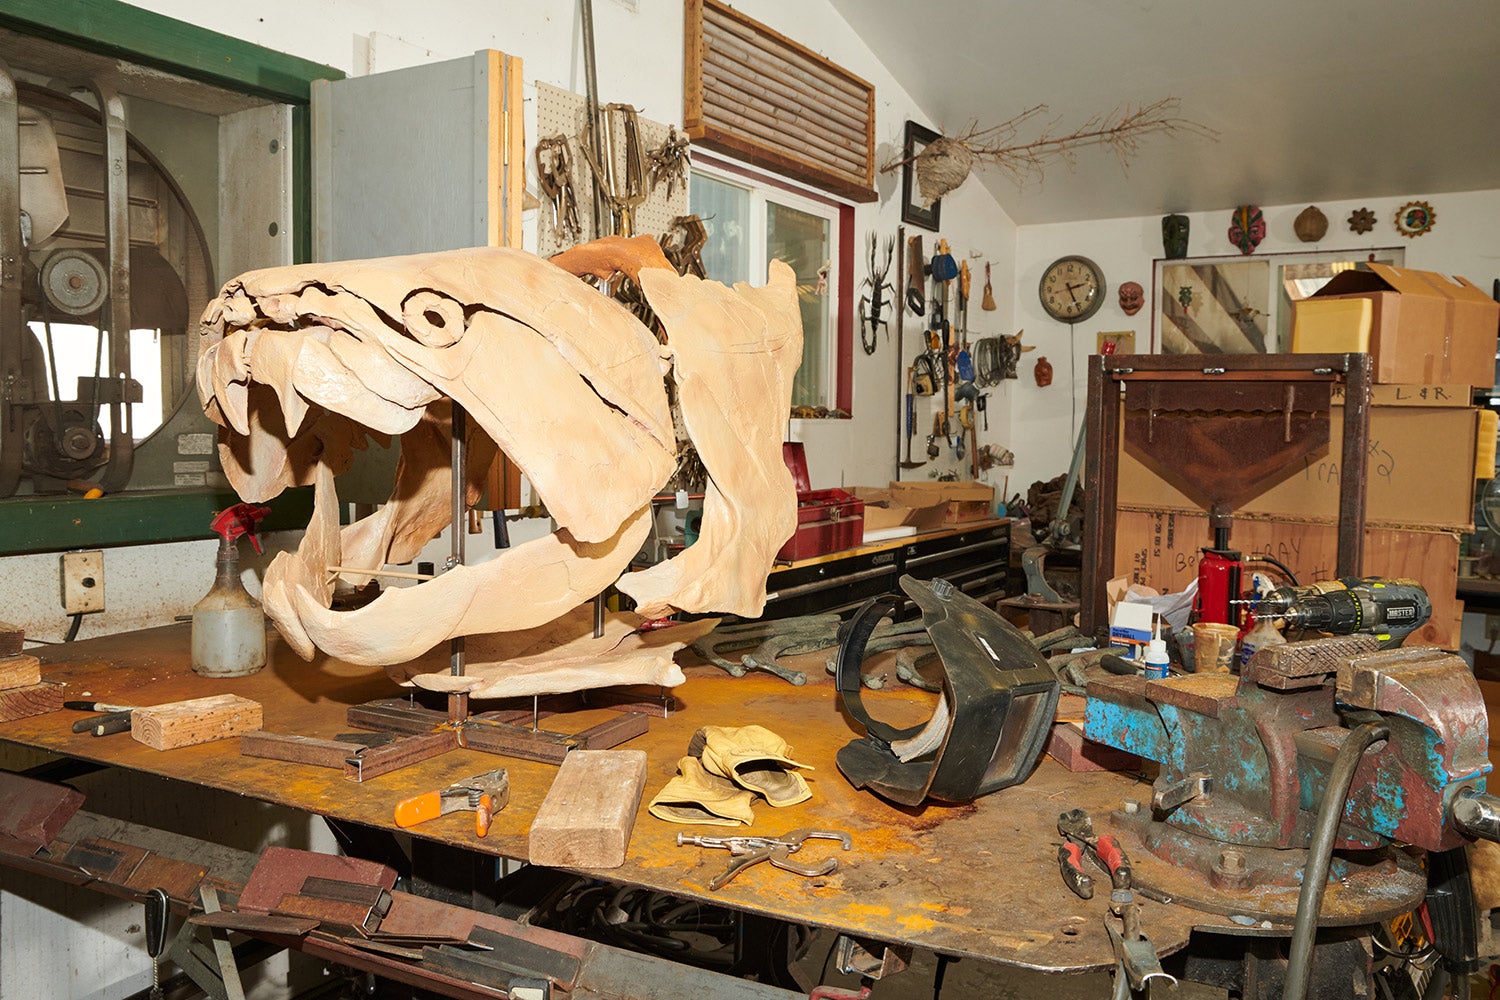 replica head of large, ancient fish sits on workshop table